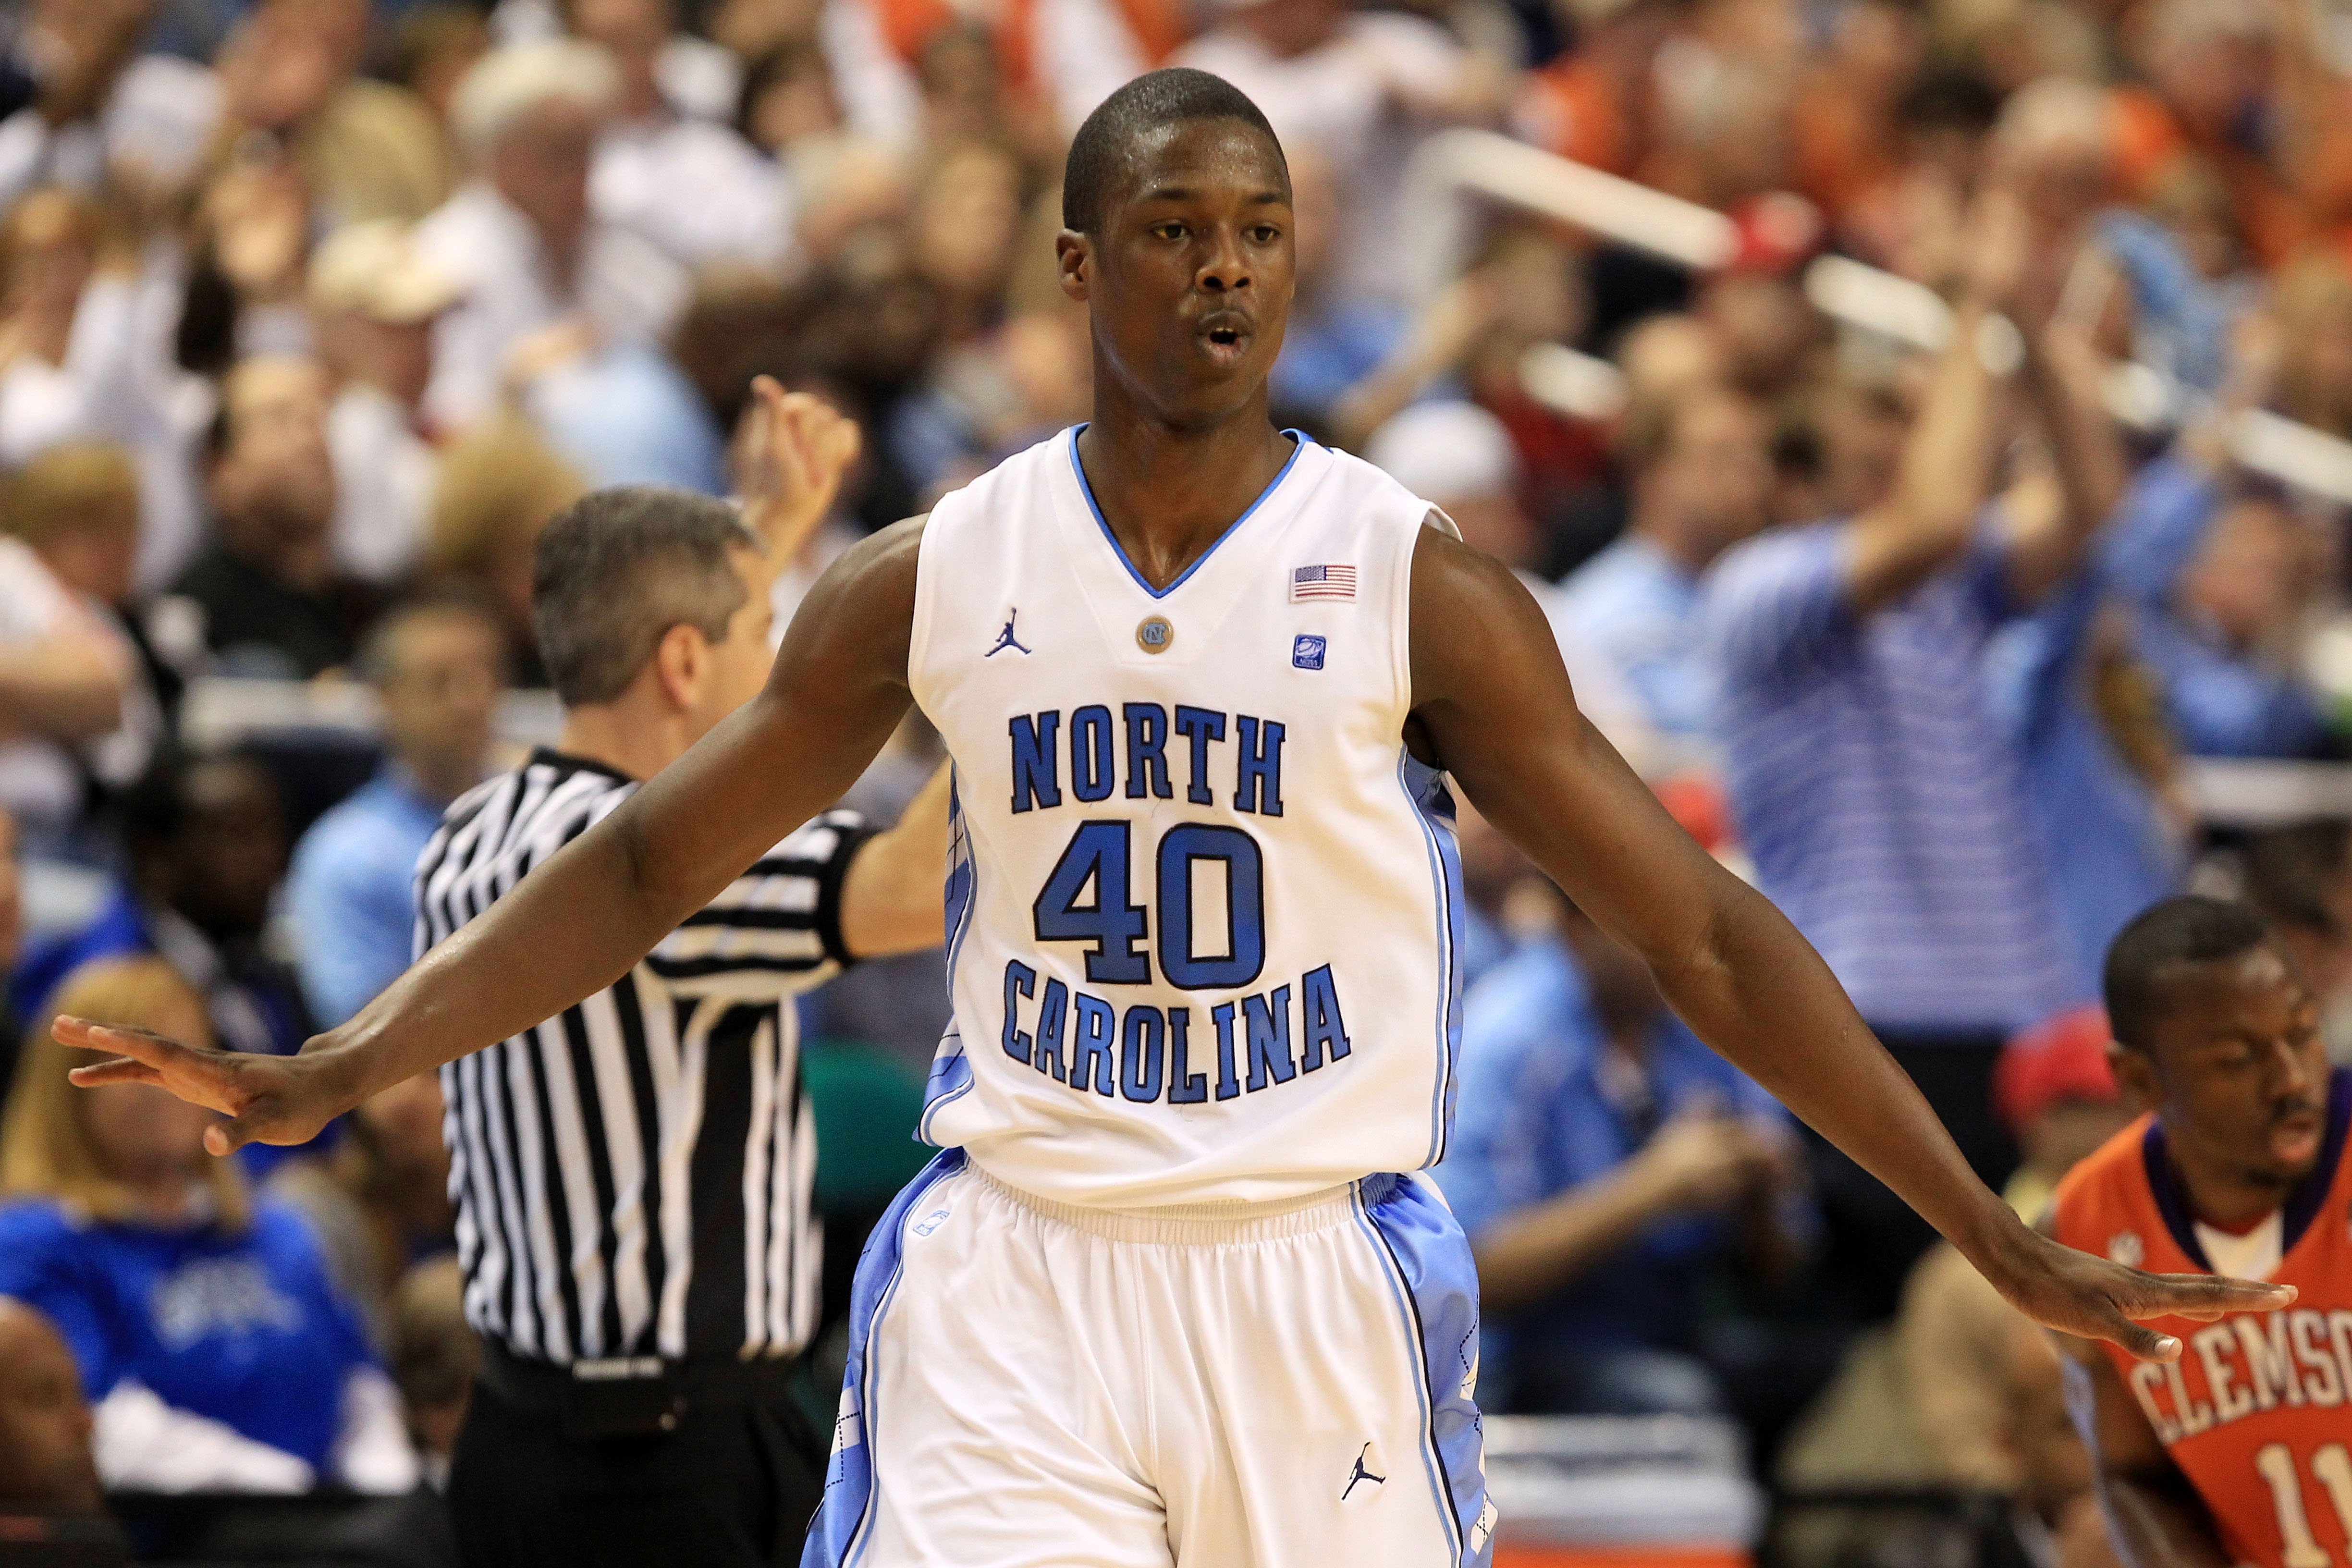 GREENSBORO, NC - MARCH 12:  Harrison Barnes #40 of the North Carolina Tar Heels reacts while playing against the Clemson Tigers in the semifinals of the 2011 ACC men's basketball tournament at the Greensboro Coliseum on March 12, 2011 in Greensboro, North